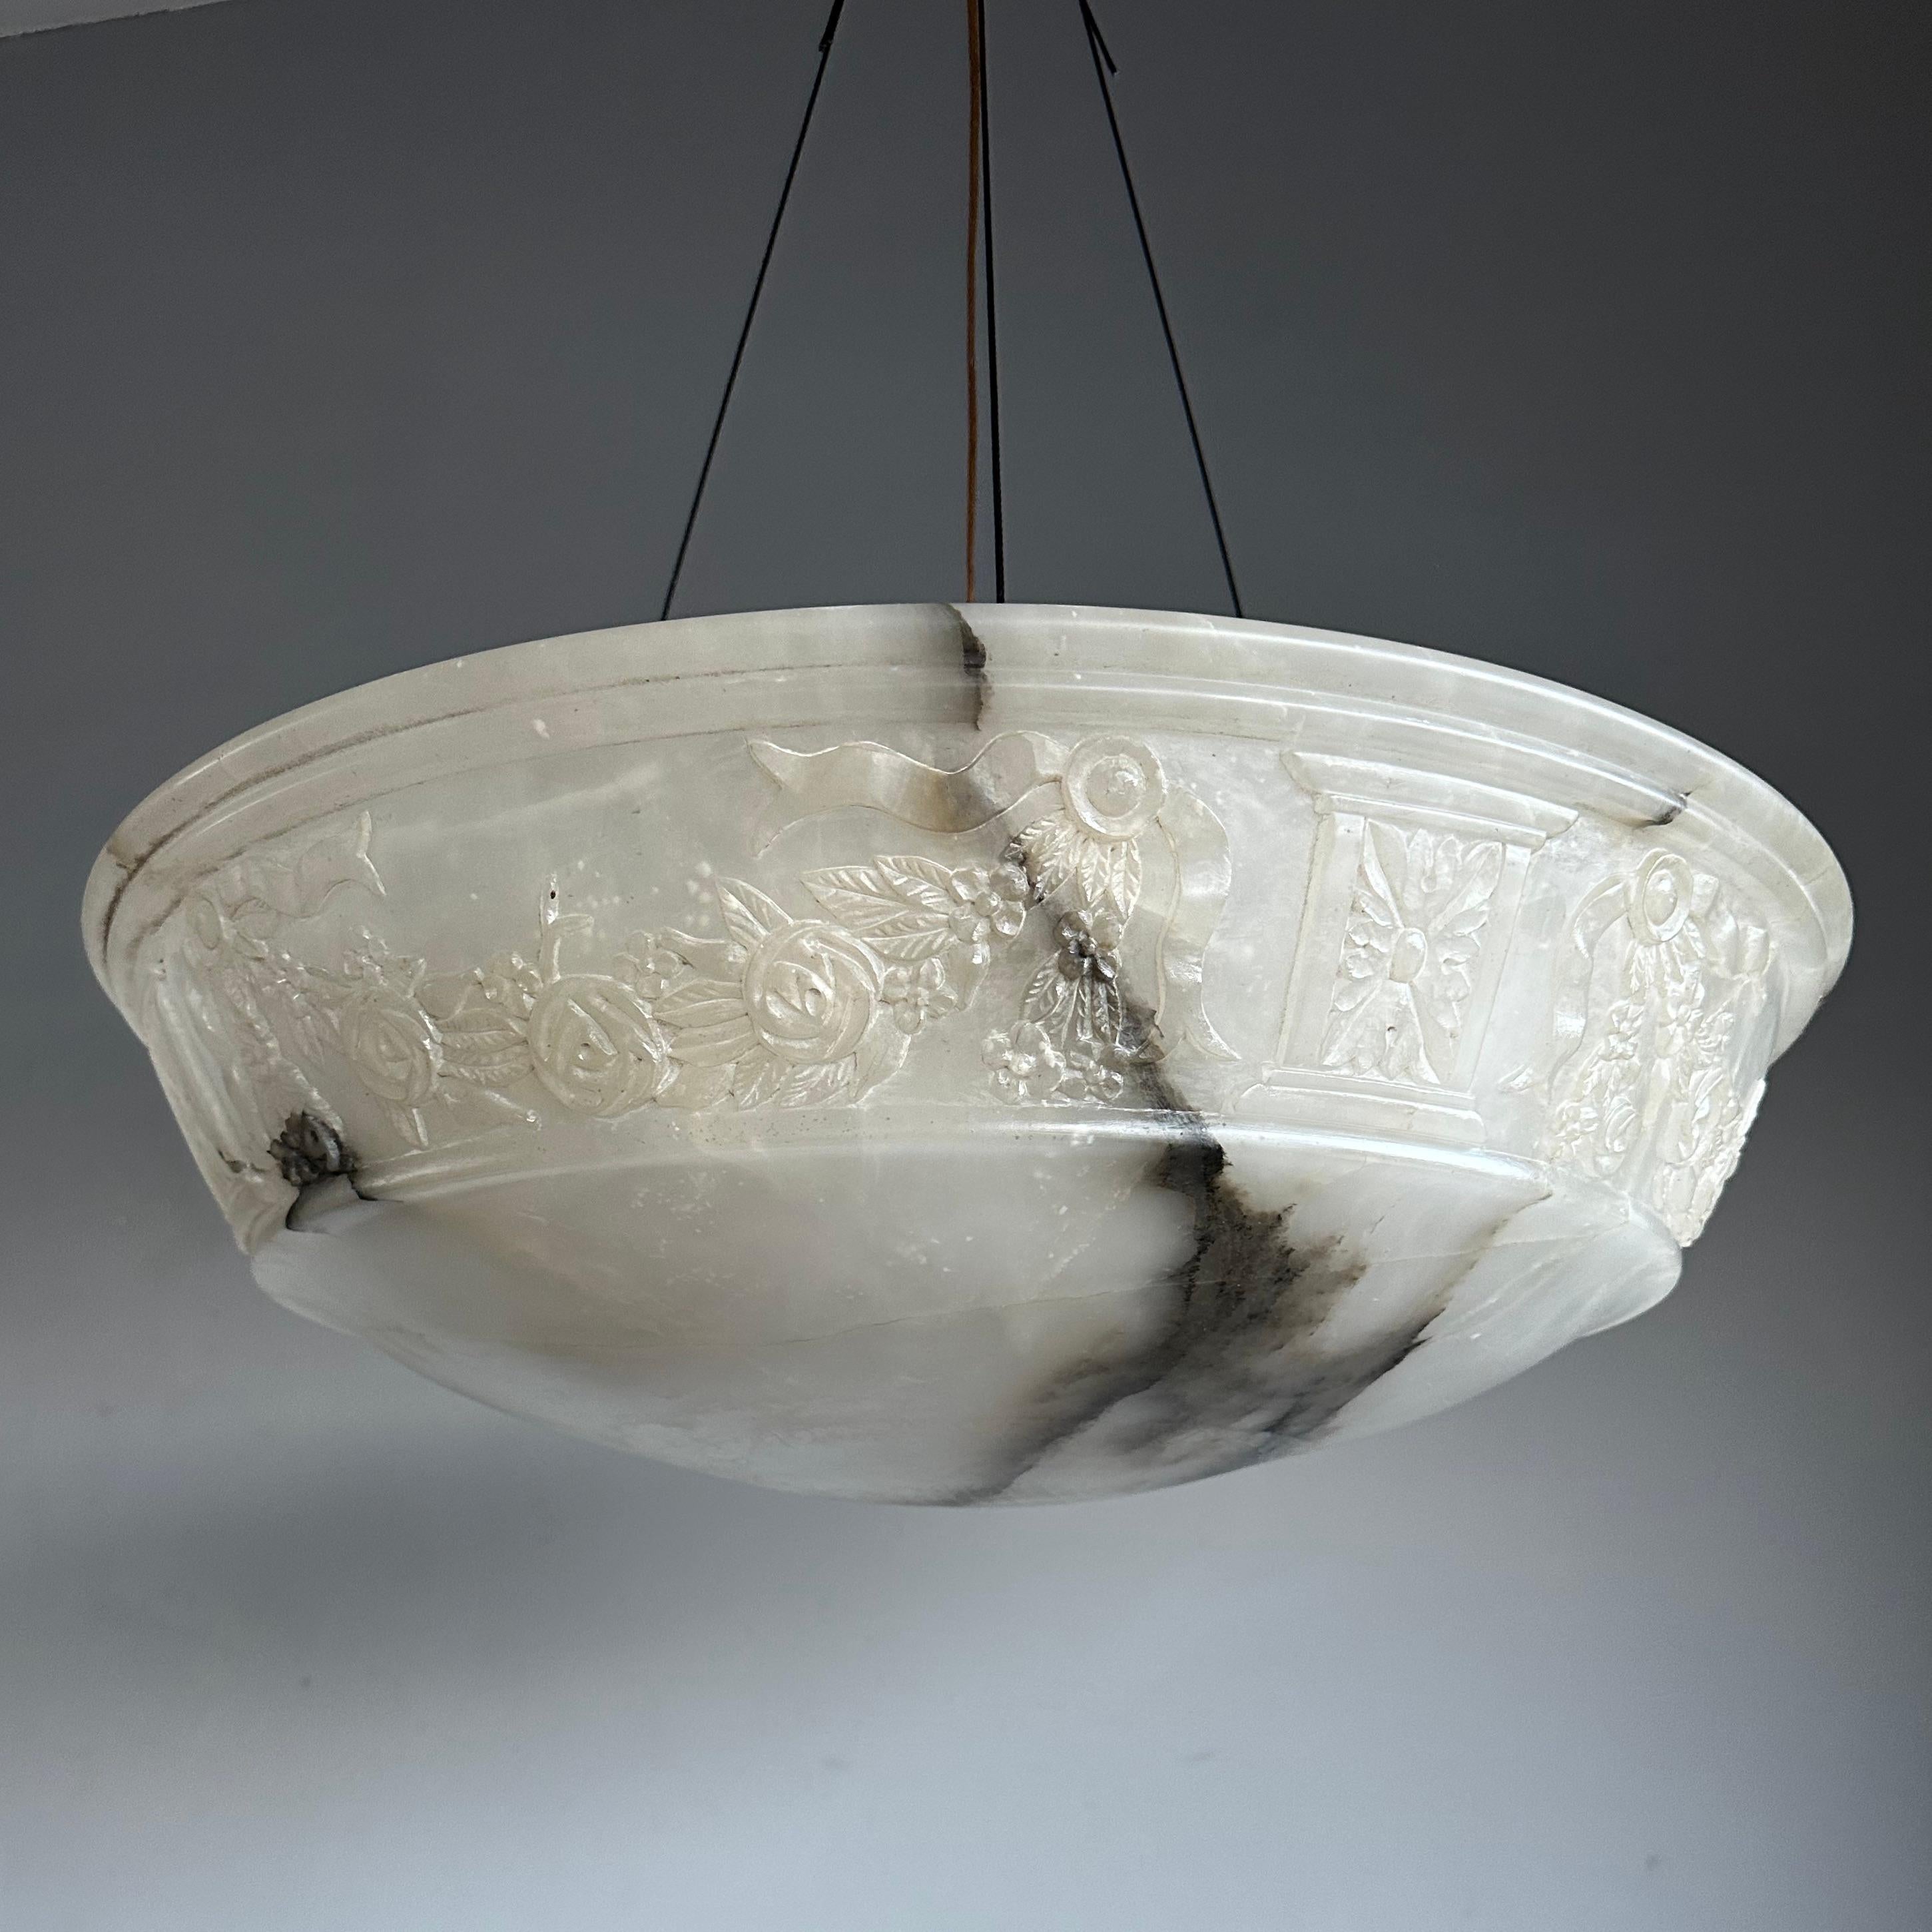 Neoclassical Revival HUGE Antique Neoclassical Style White, Black Alabaster Pendant Chandelier 1 of 2